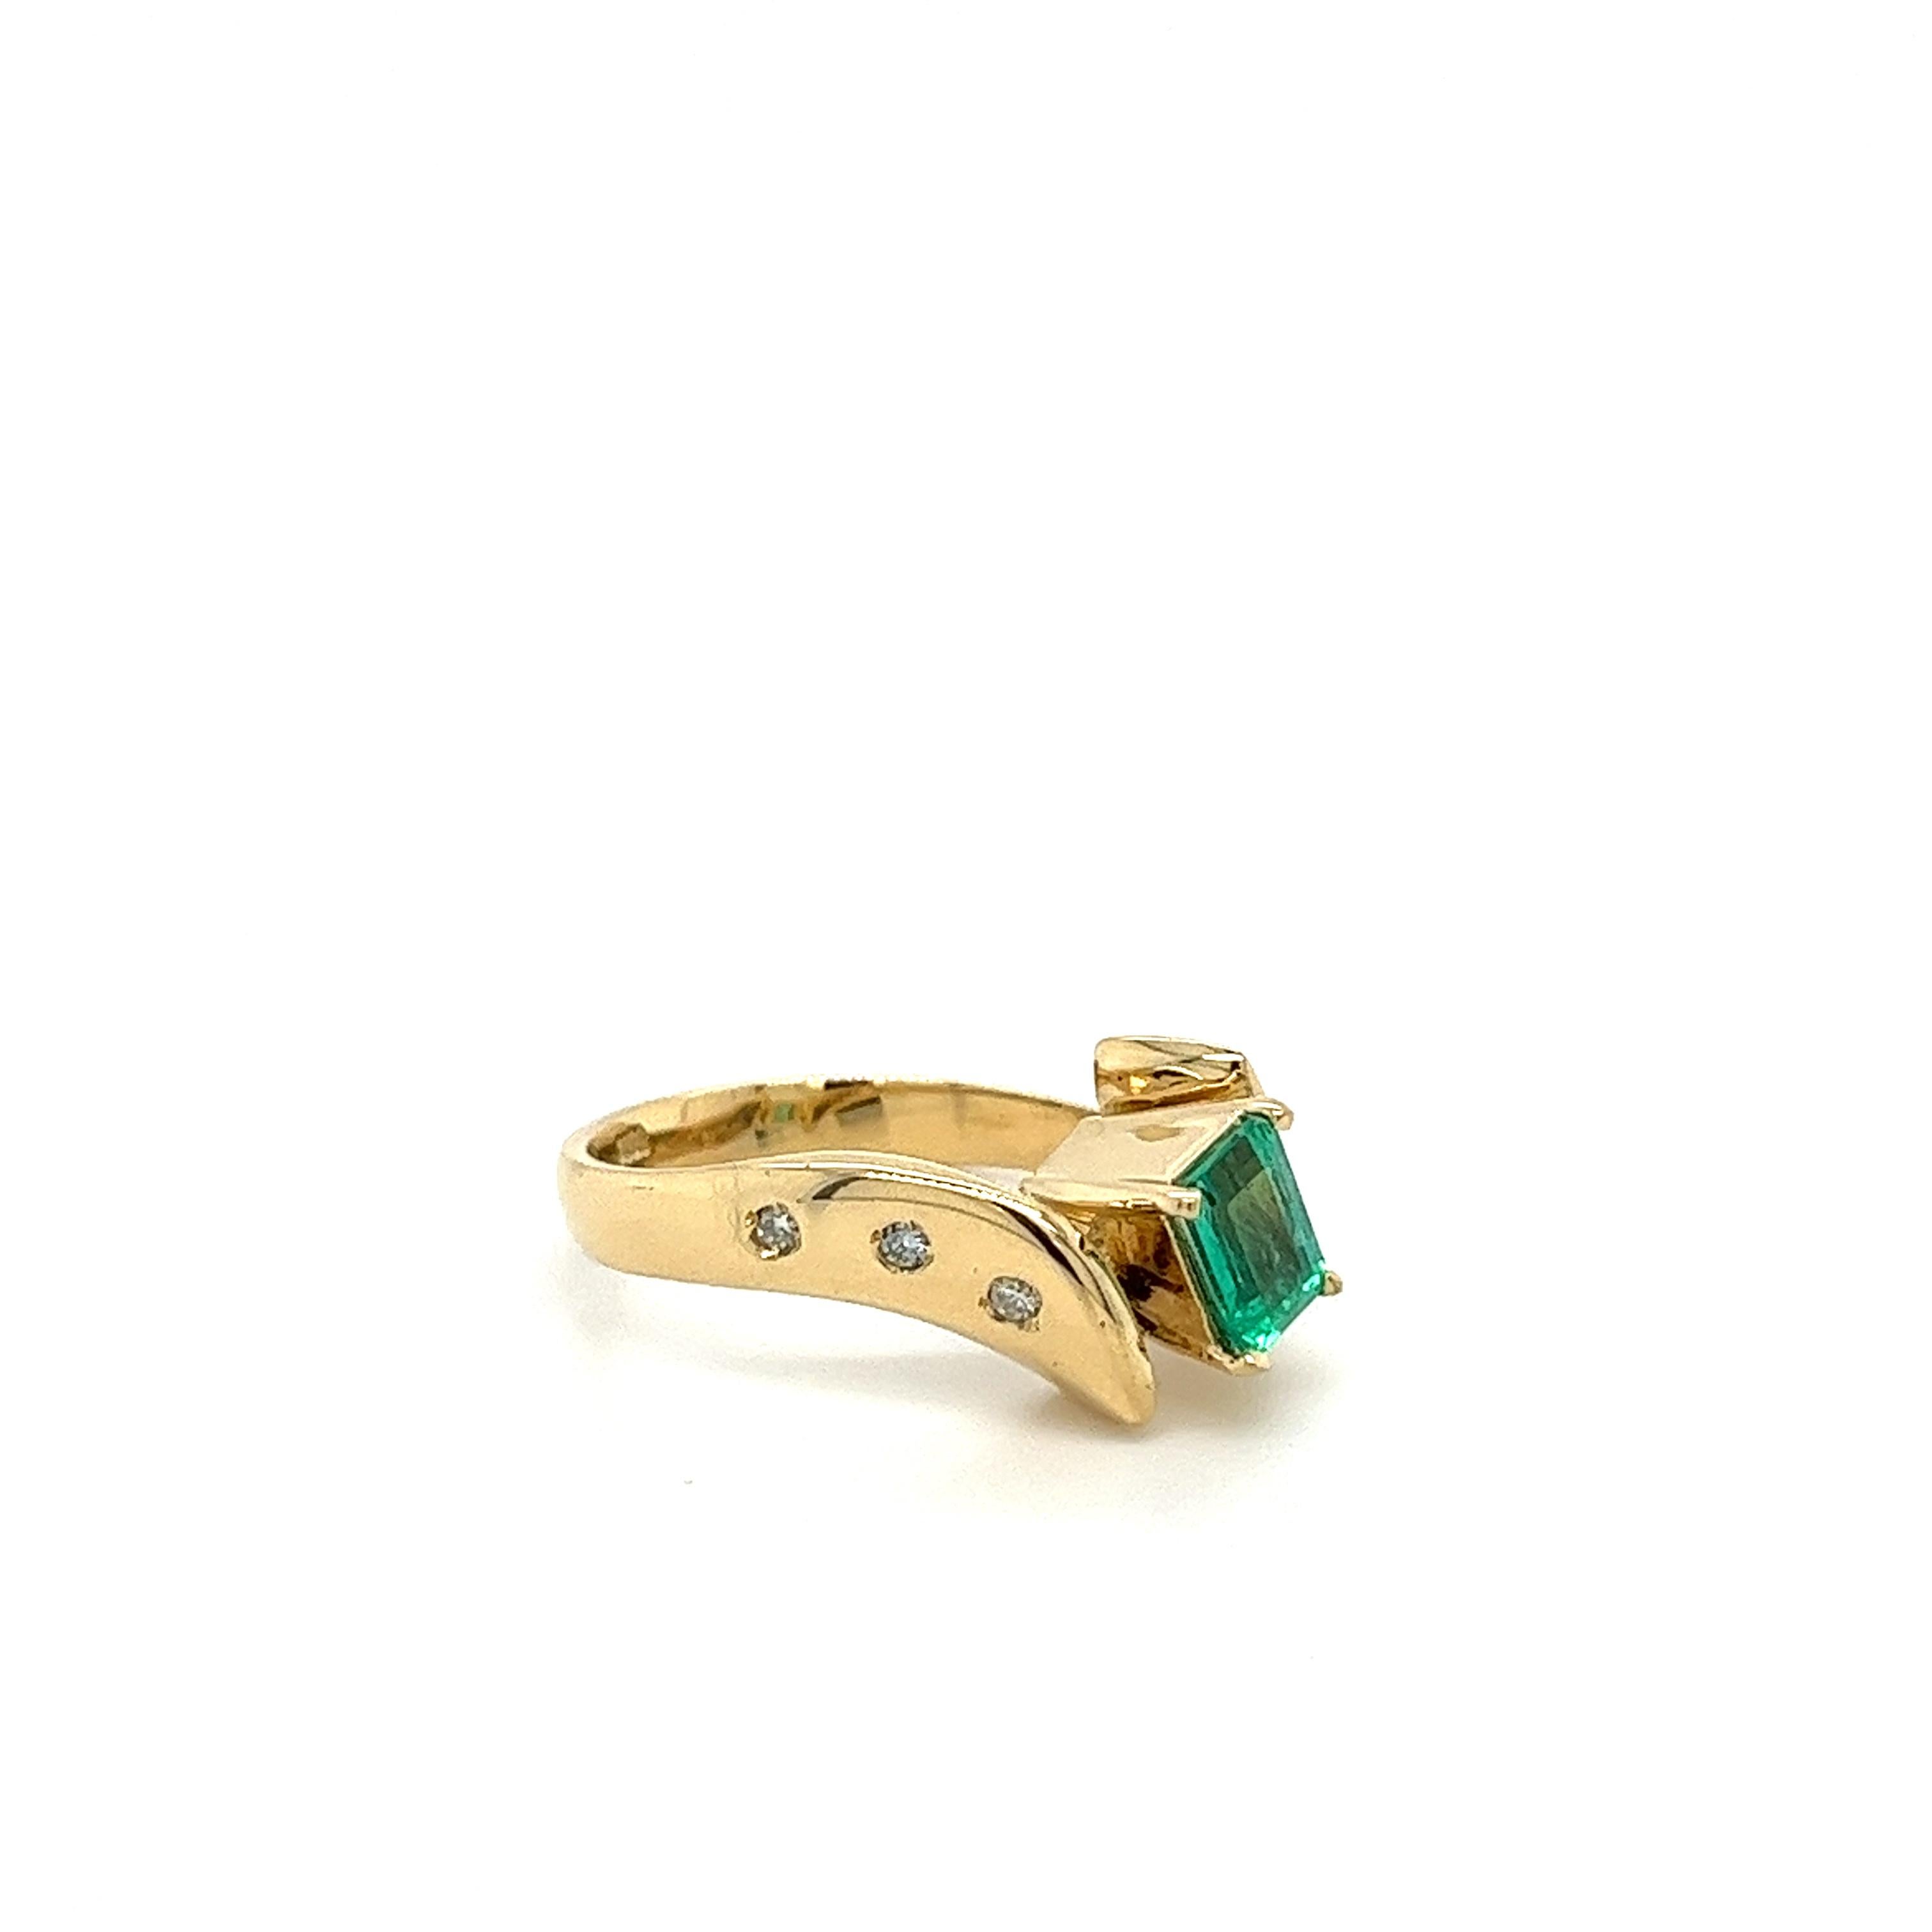 The center stone boasts a stunning 0.70-carat emerald, radiating with a captivating green hue. Surrounding the emerald, floating diamonds totaling 0.10 carats.

Set in a graceful bypass design, this ring showcases symmetrical perfection and